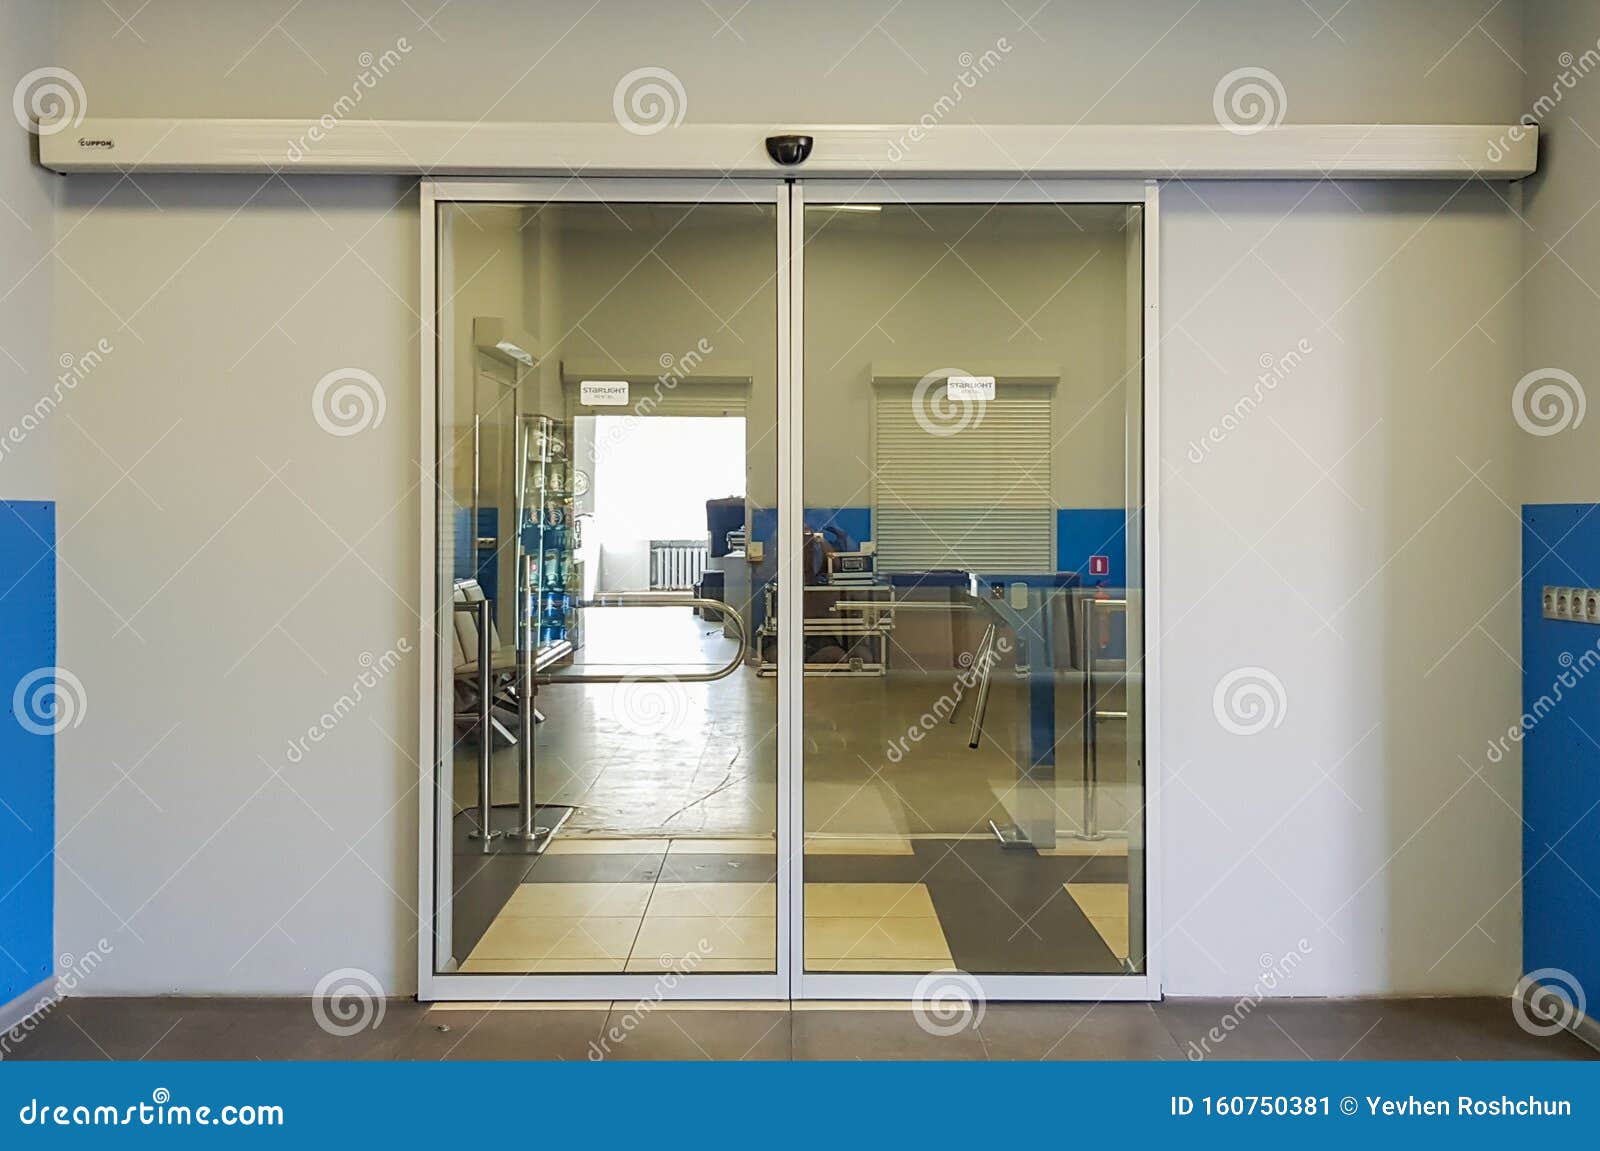 empty sliding glass front door at the airport. glass doors in the office. glass entrance. entrance to administration